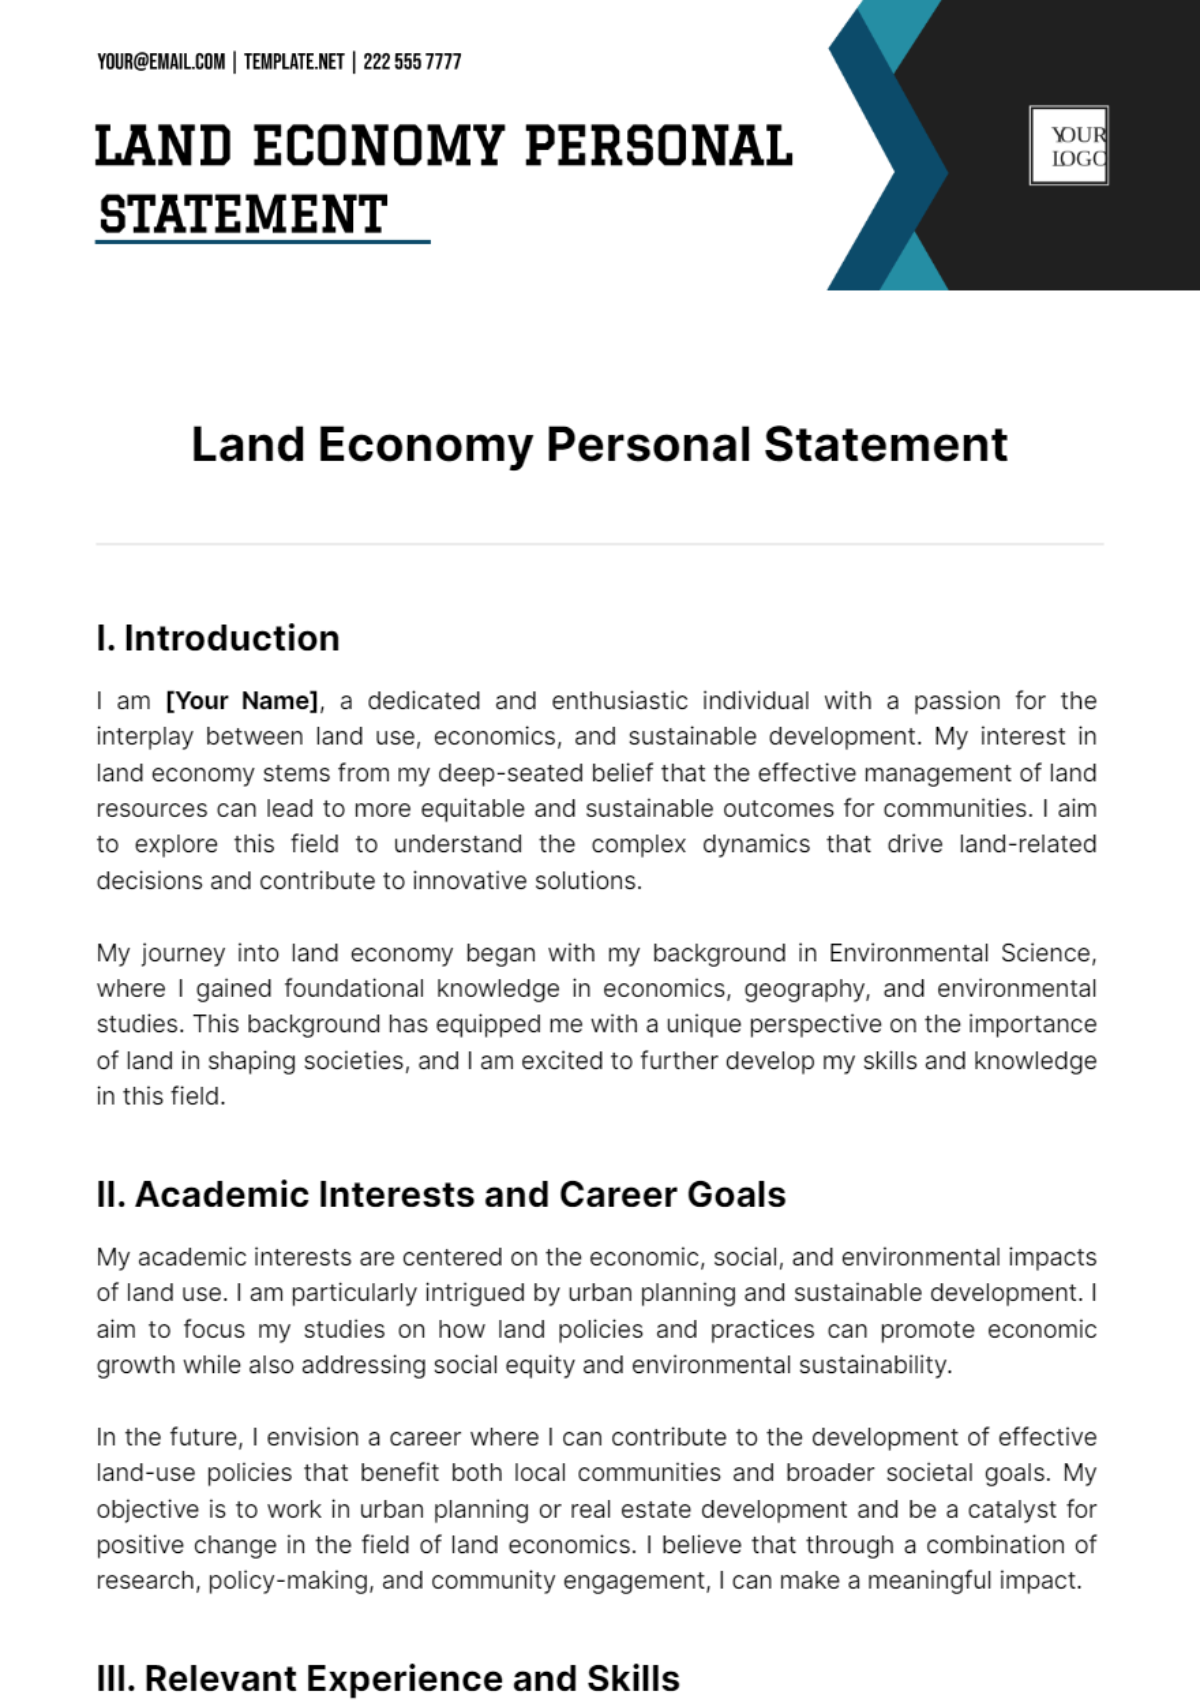 Land Economy Personal Statement Template